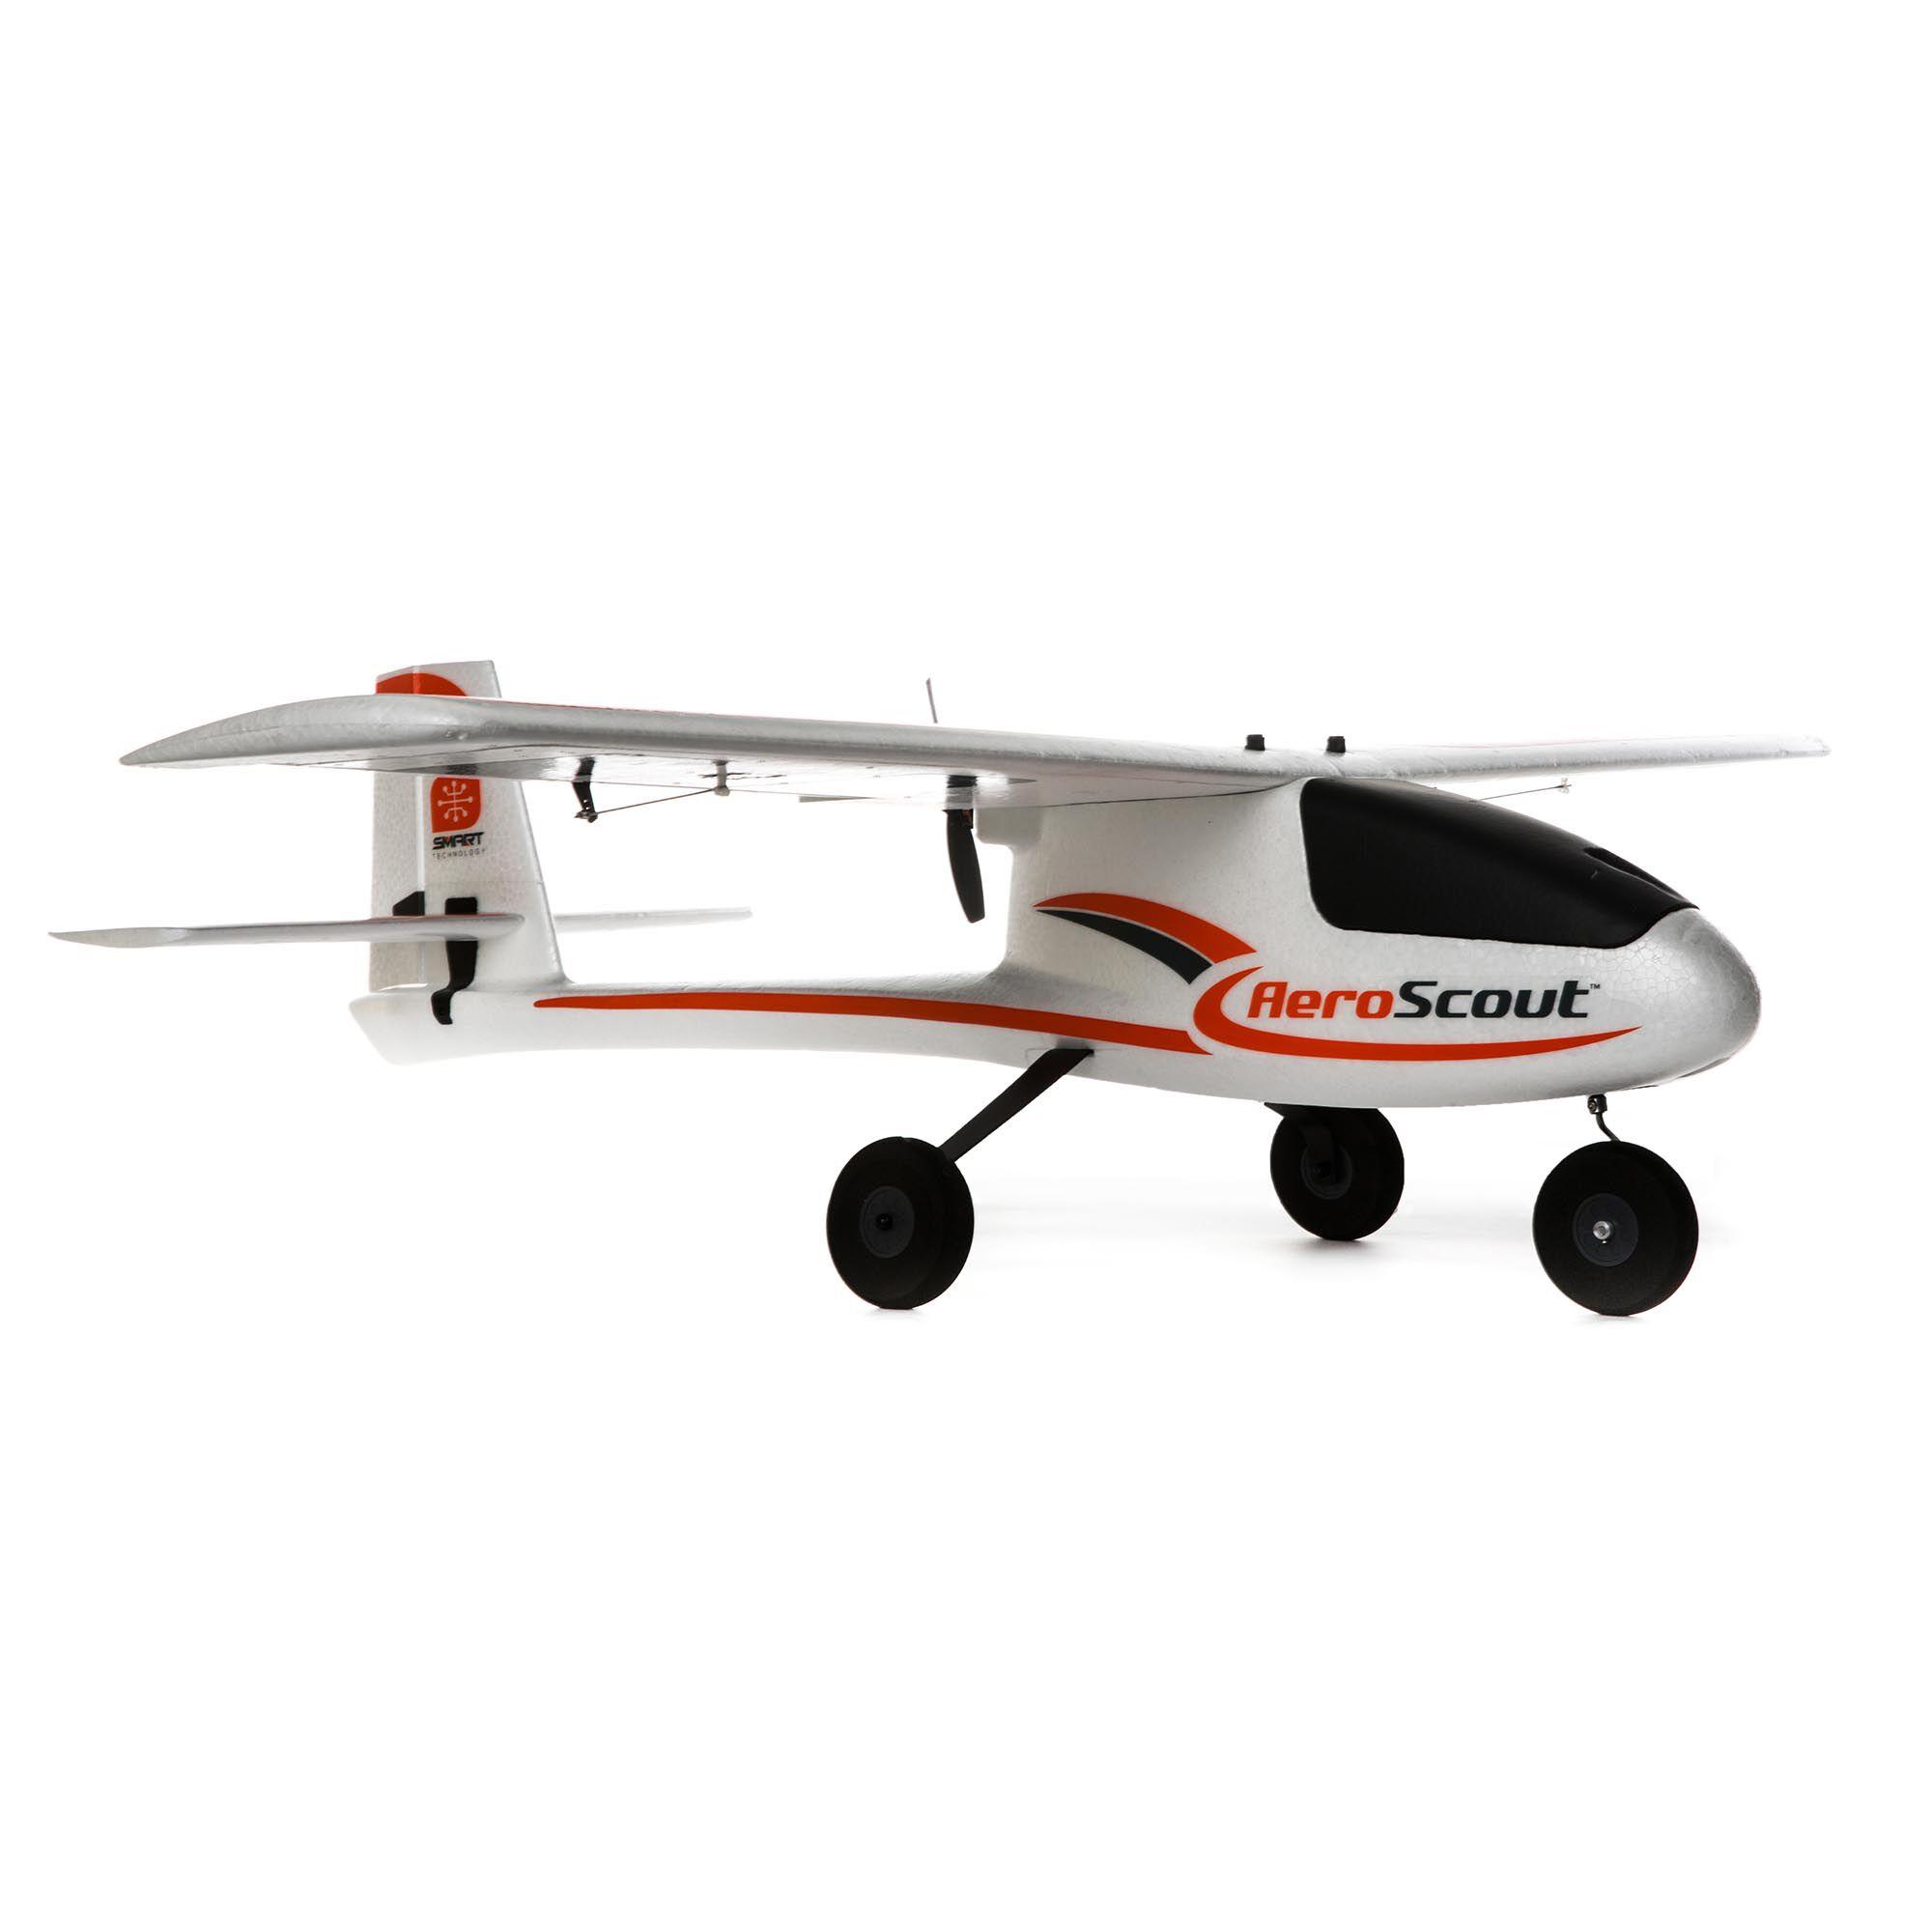 Aeroscout S 2 1.1 M Bnf Basic: A Versatile and Durable RC Aircraft for the Aspiring Pilot